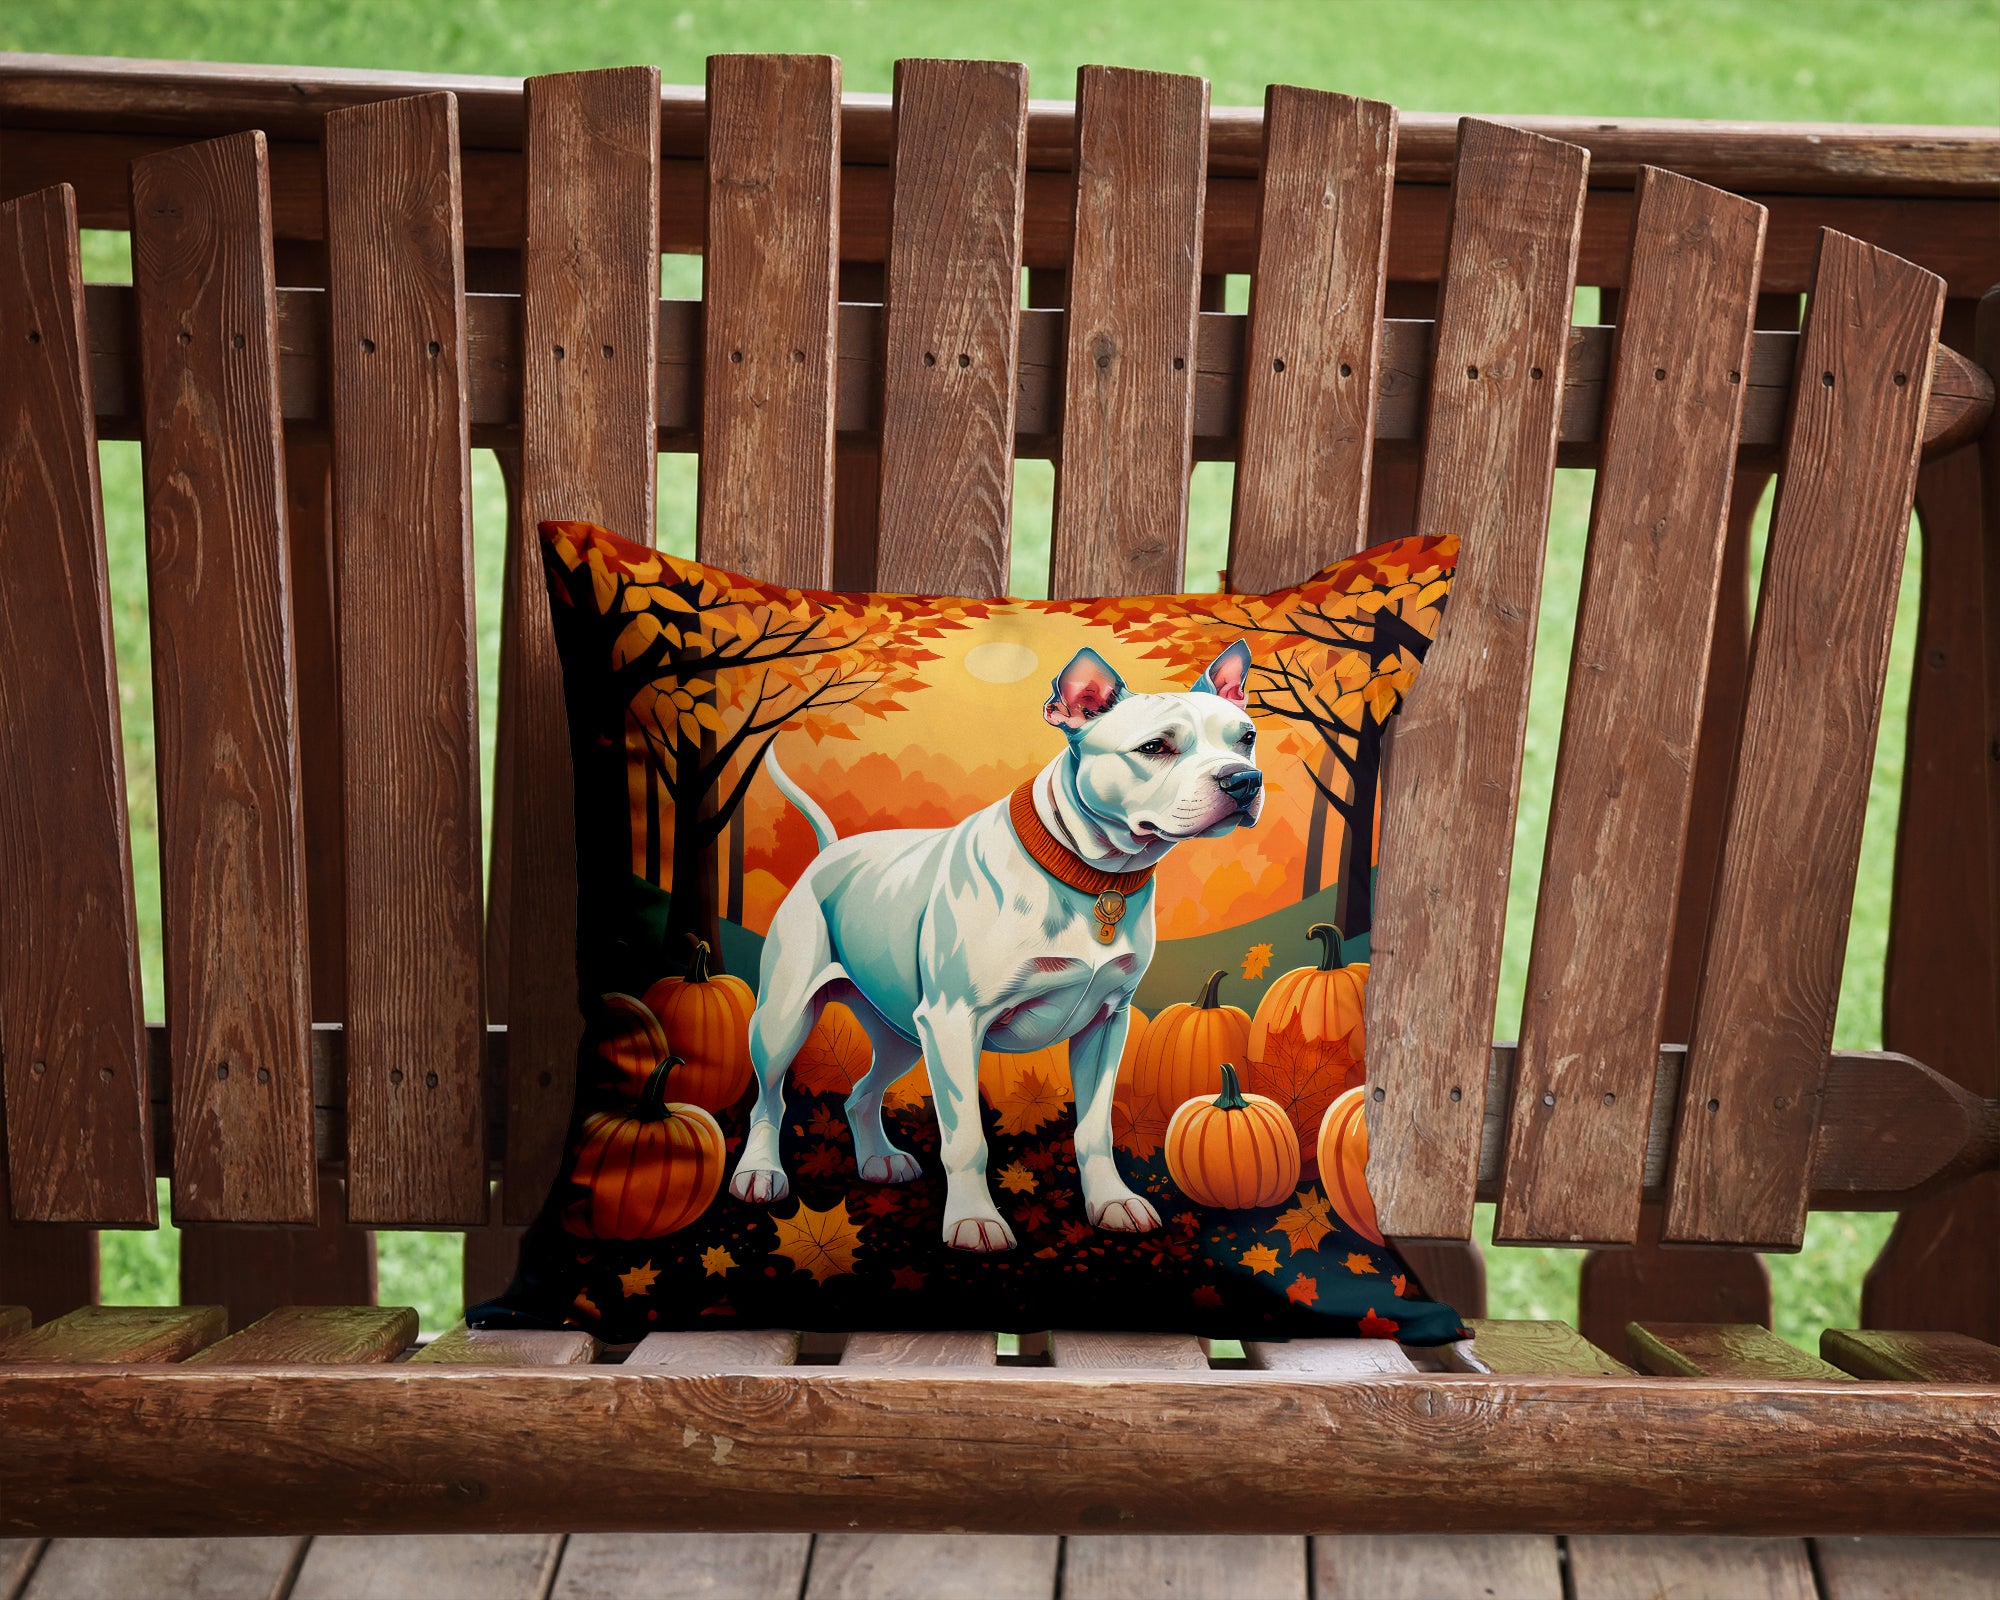 White Pit Bull Terrier Fall Fabric Decorative Pillow